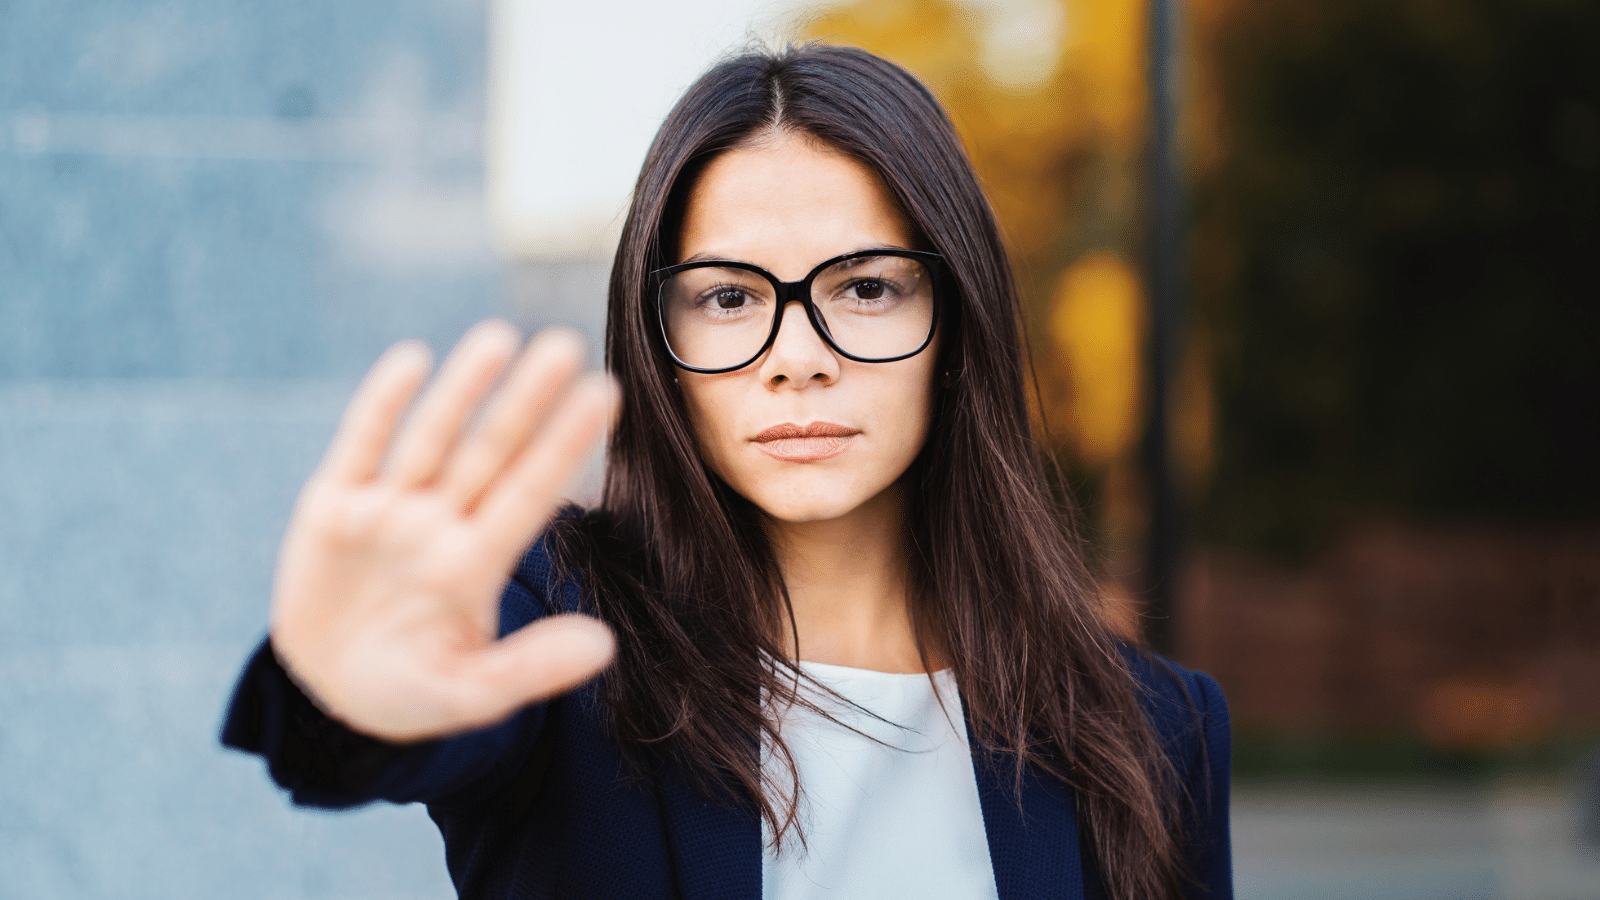 Portrait of young businesswoman disapproval gesture with hand